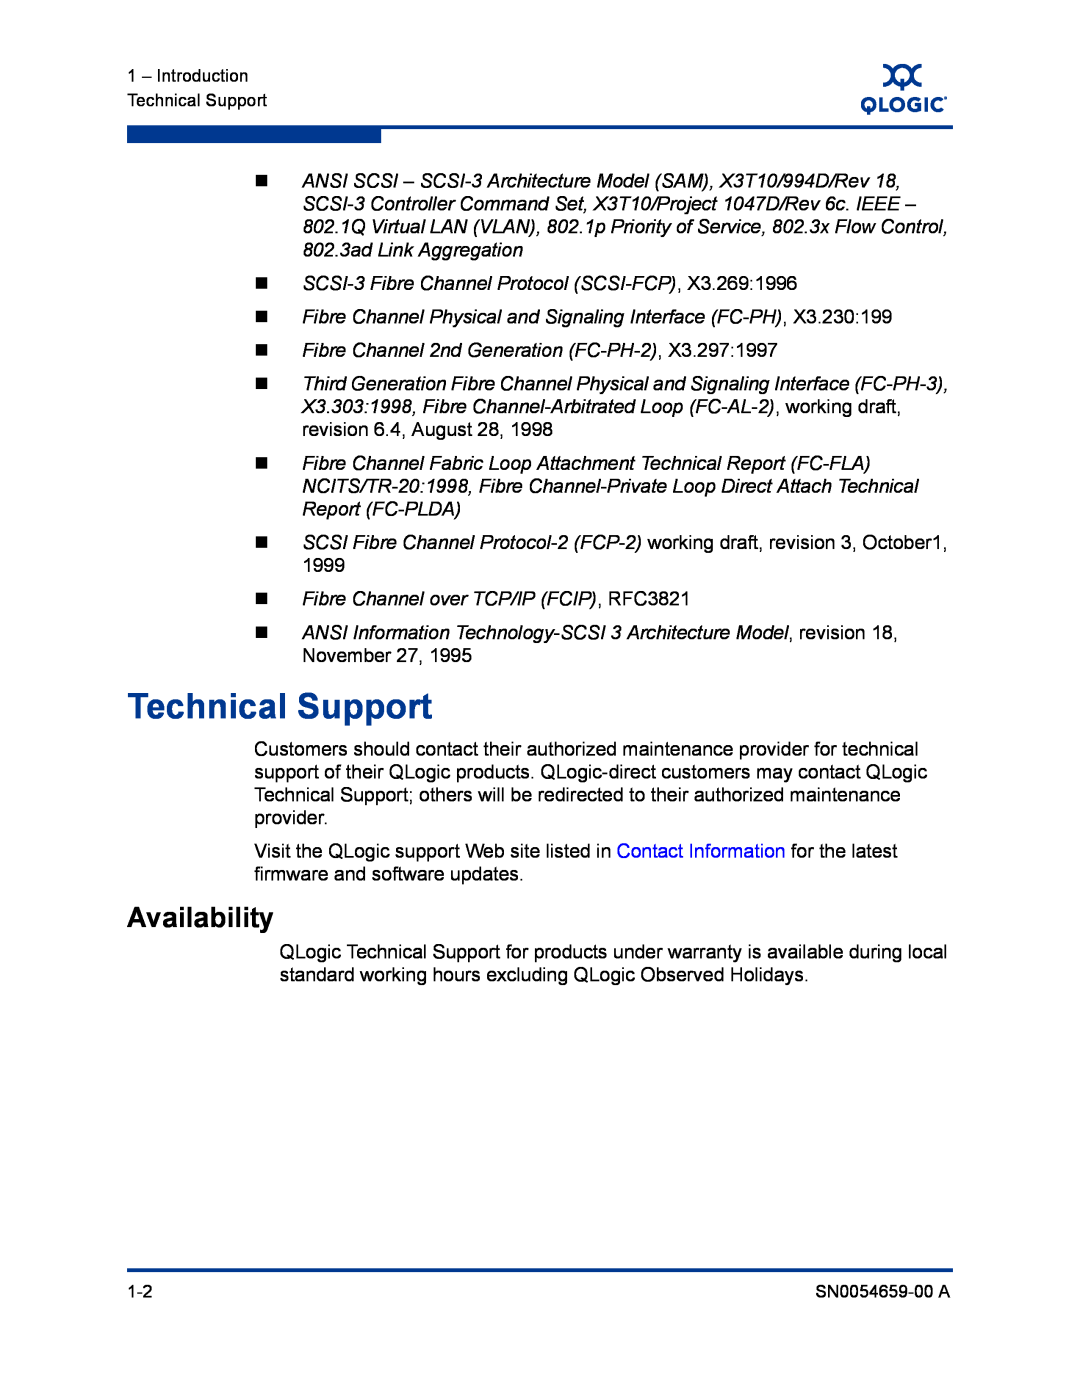 Q-Logic ISR6142 manual Technical Support, Availability 